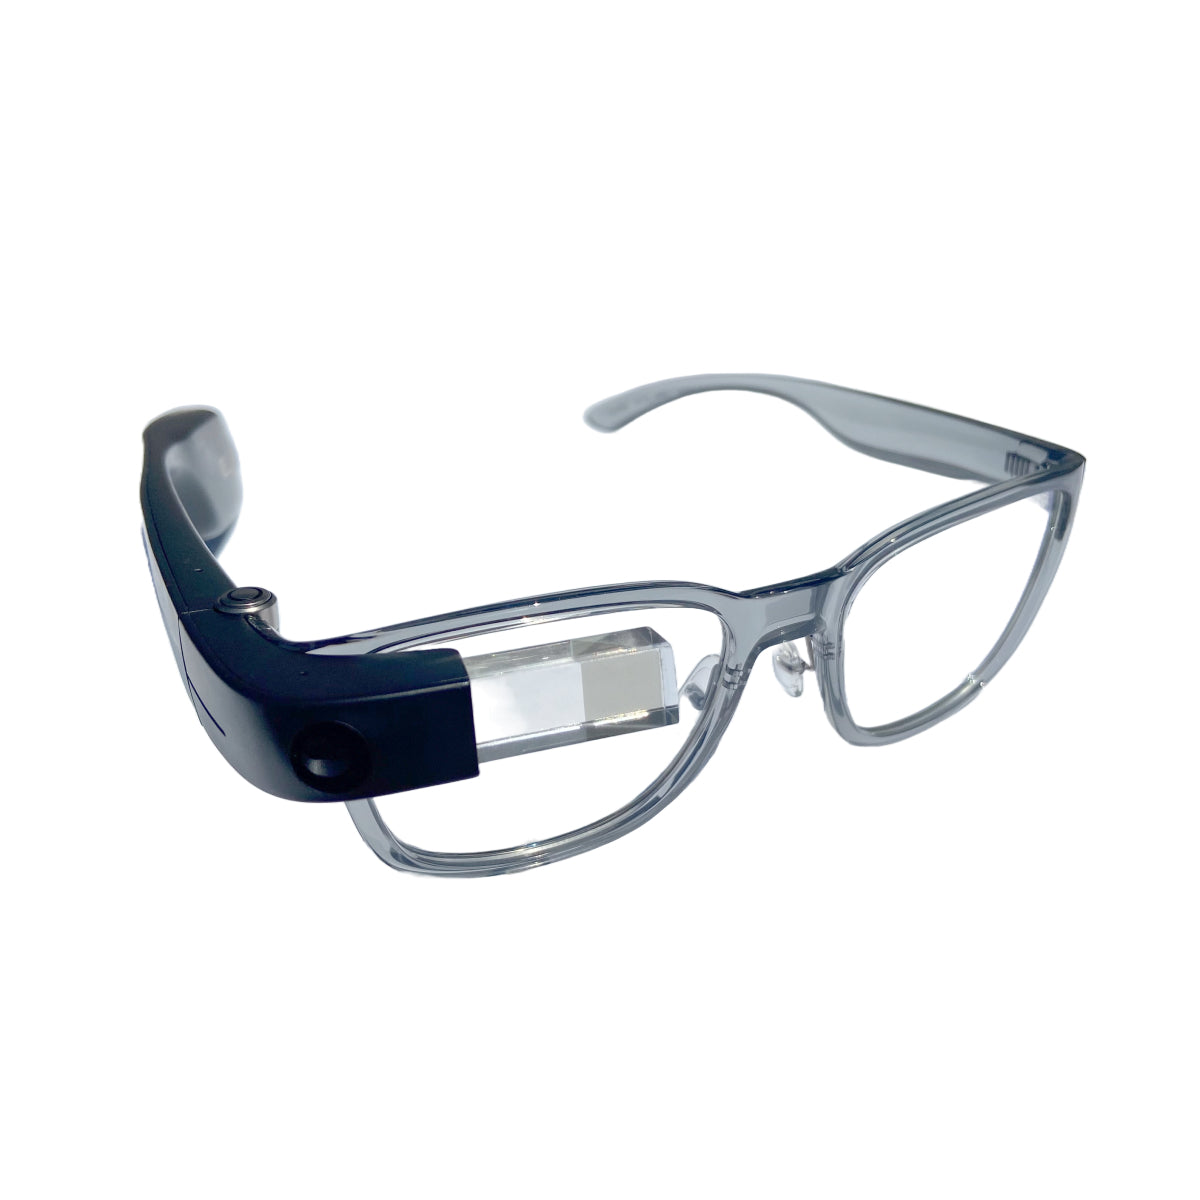 Transparent grey frames attached to the Envision Glasses - Front 3/4 view